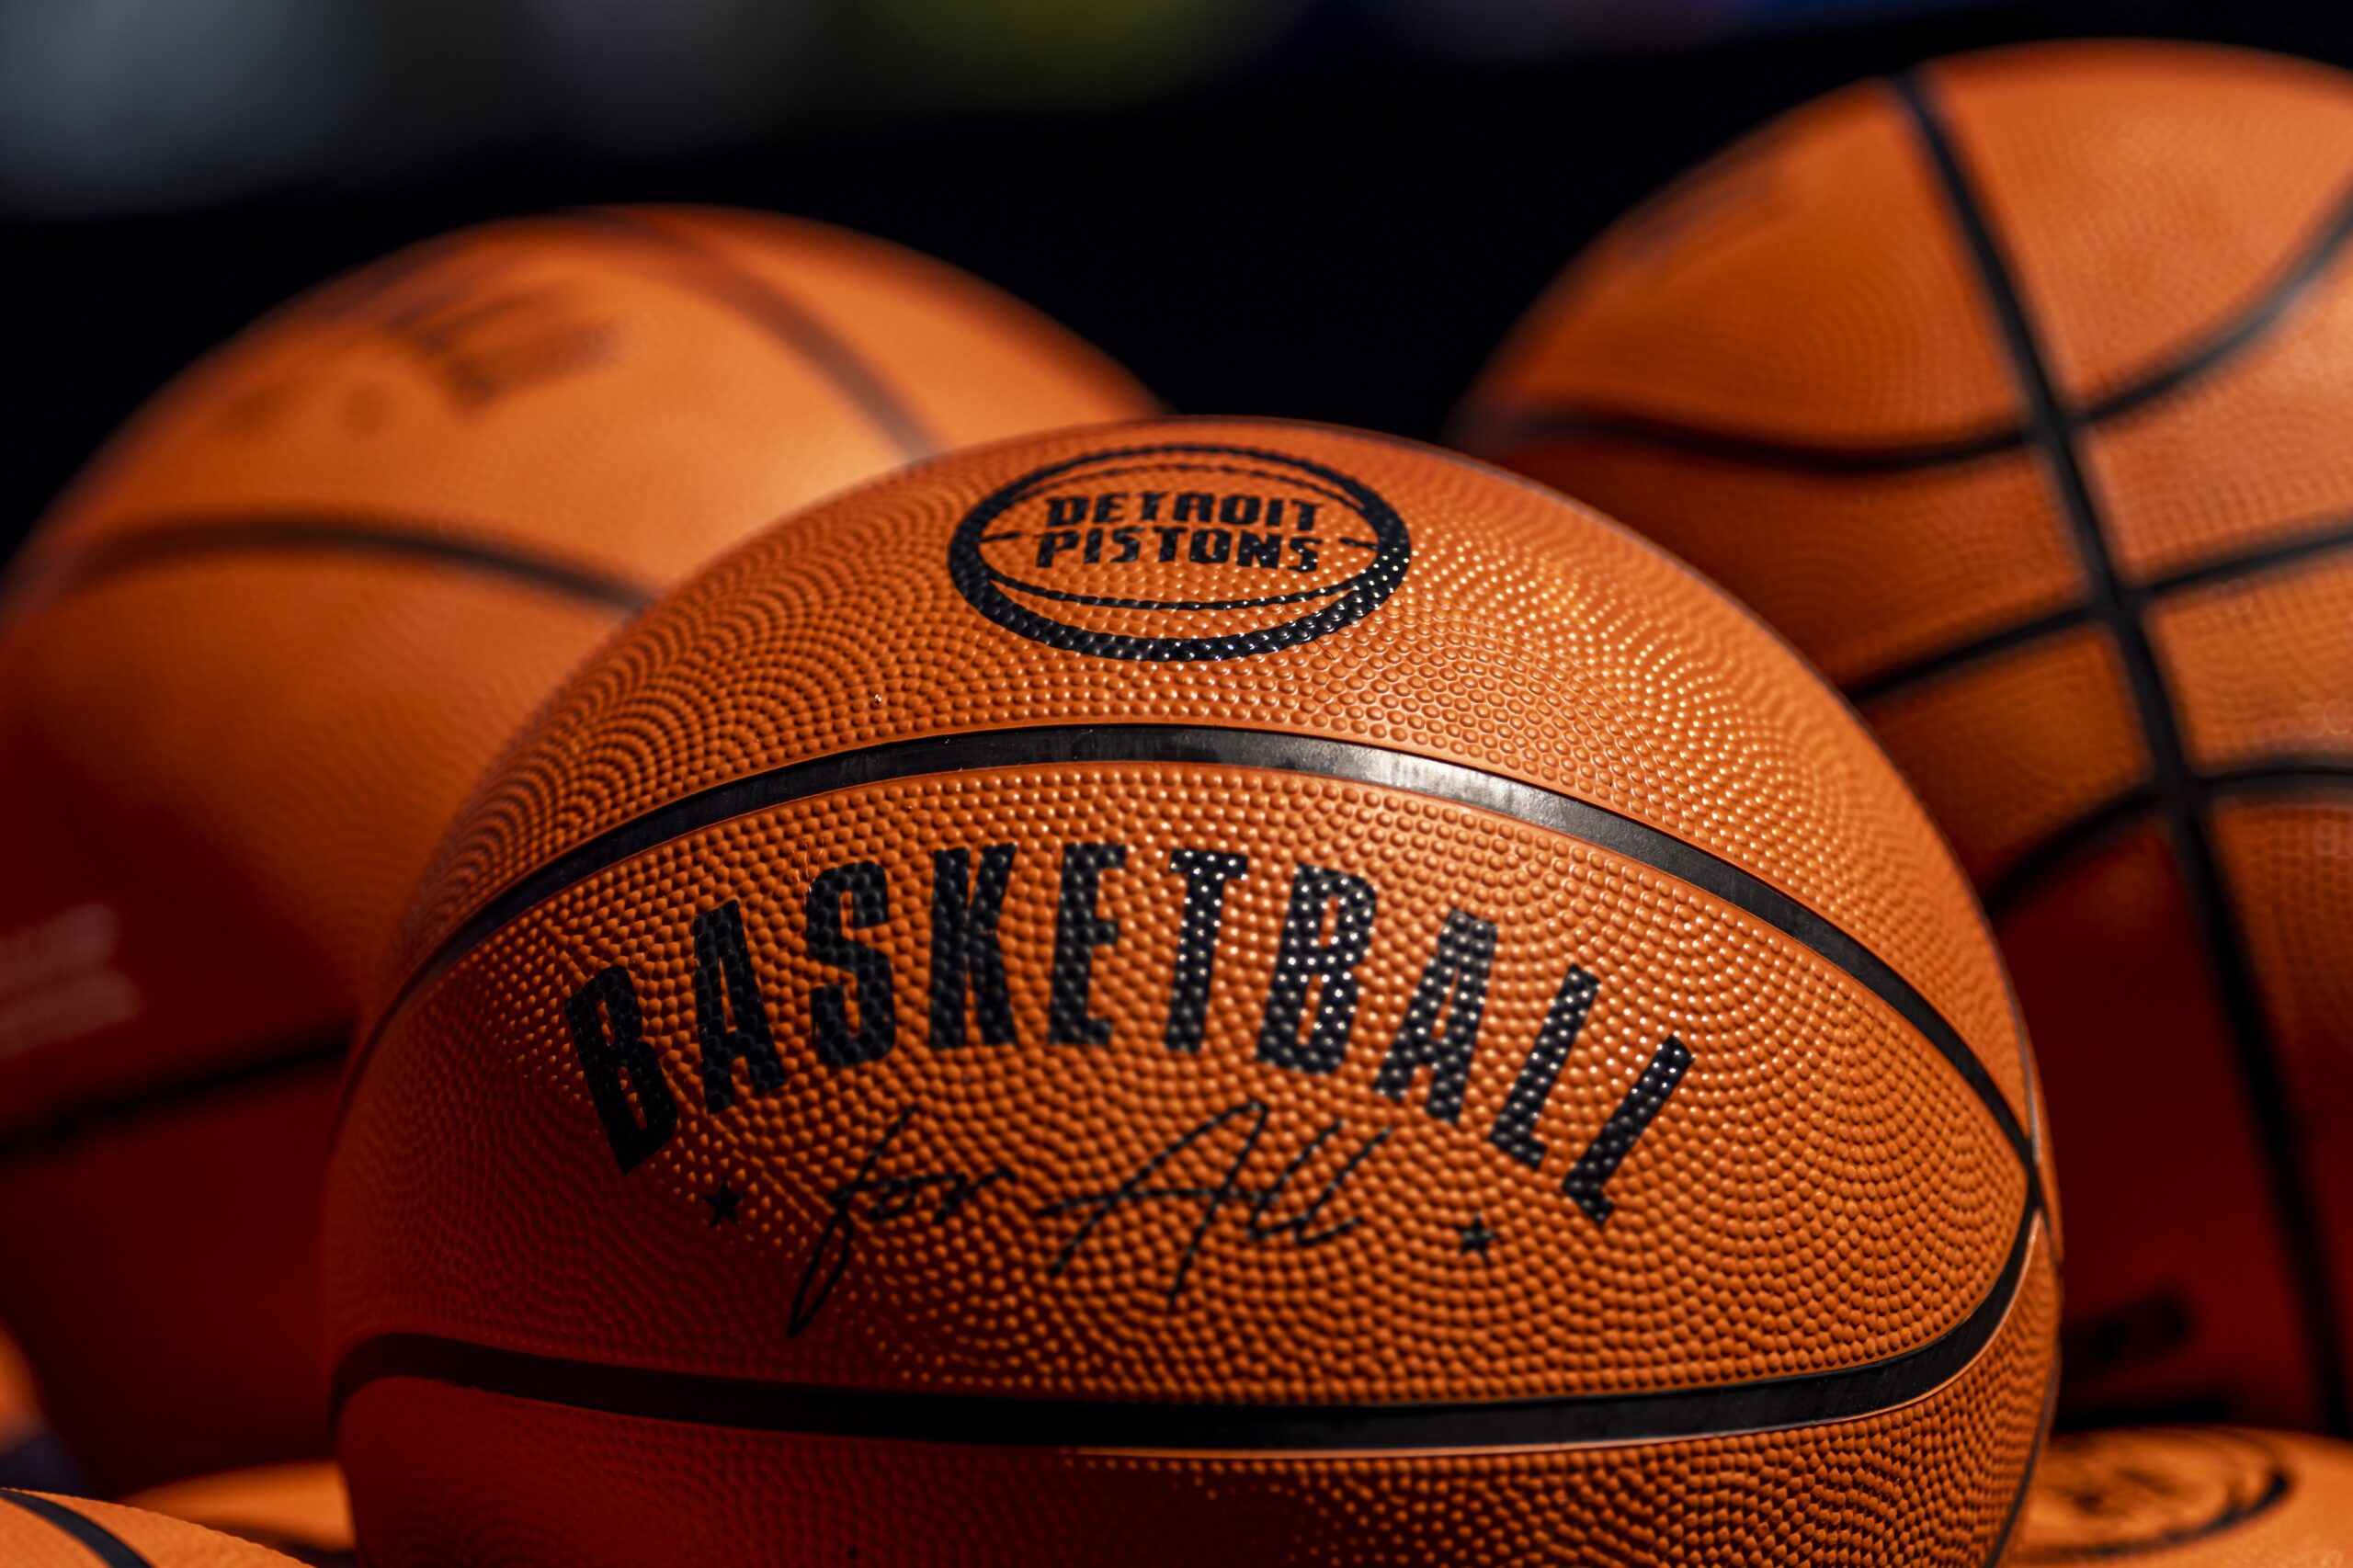 Jun 24, 2022; Detroit, Michigan, USA; A crate full of basketballs sits in front of the podium during the Detroit Pistons 2022 NBA Draft Introductory Press Conference. Mandatory Credit: Raj Mehta-USA TODAY Sports